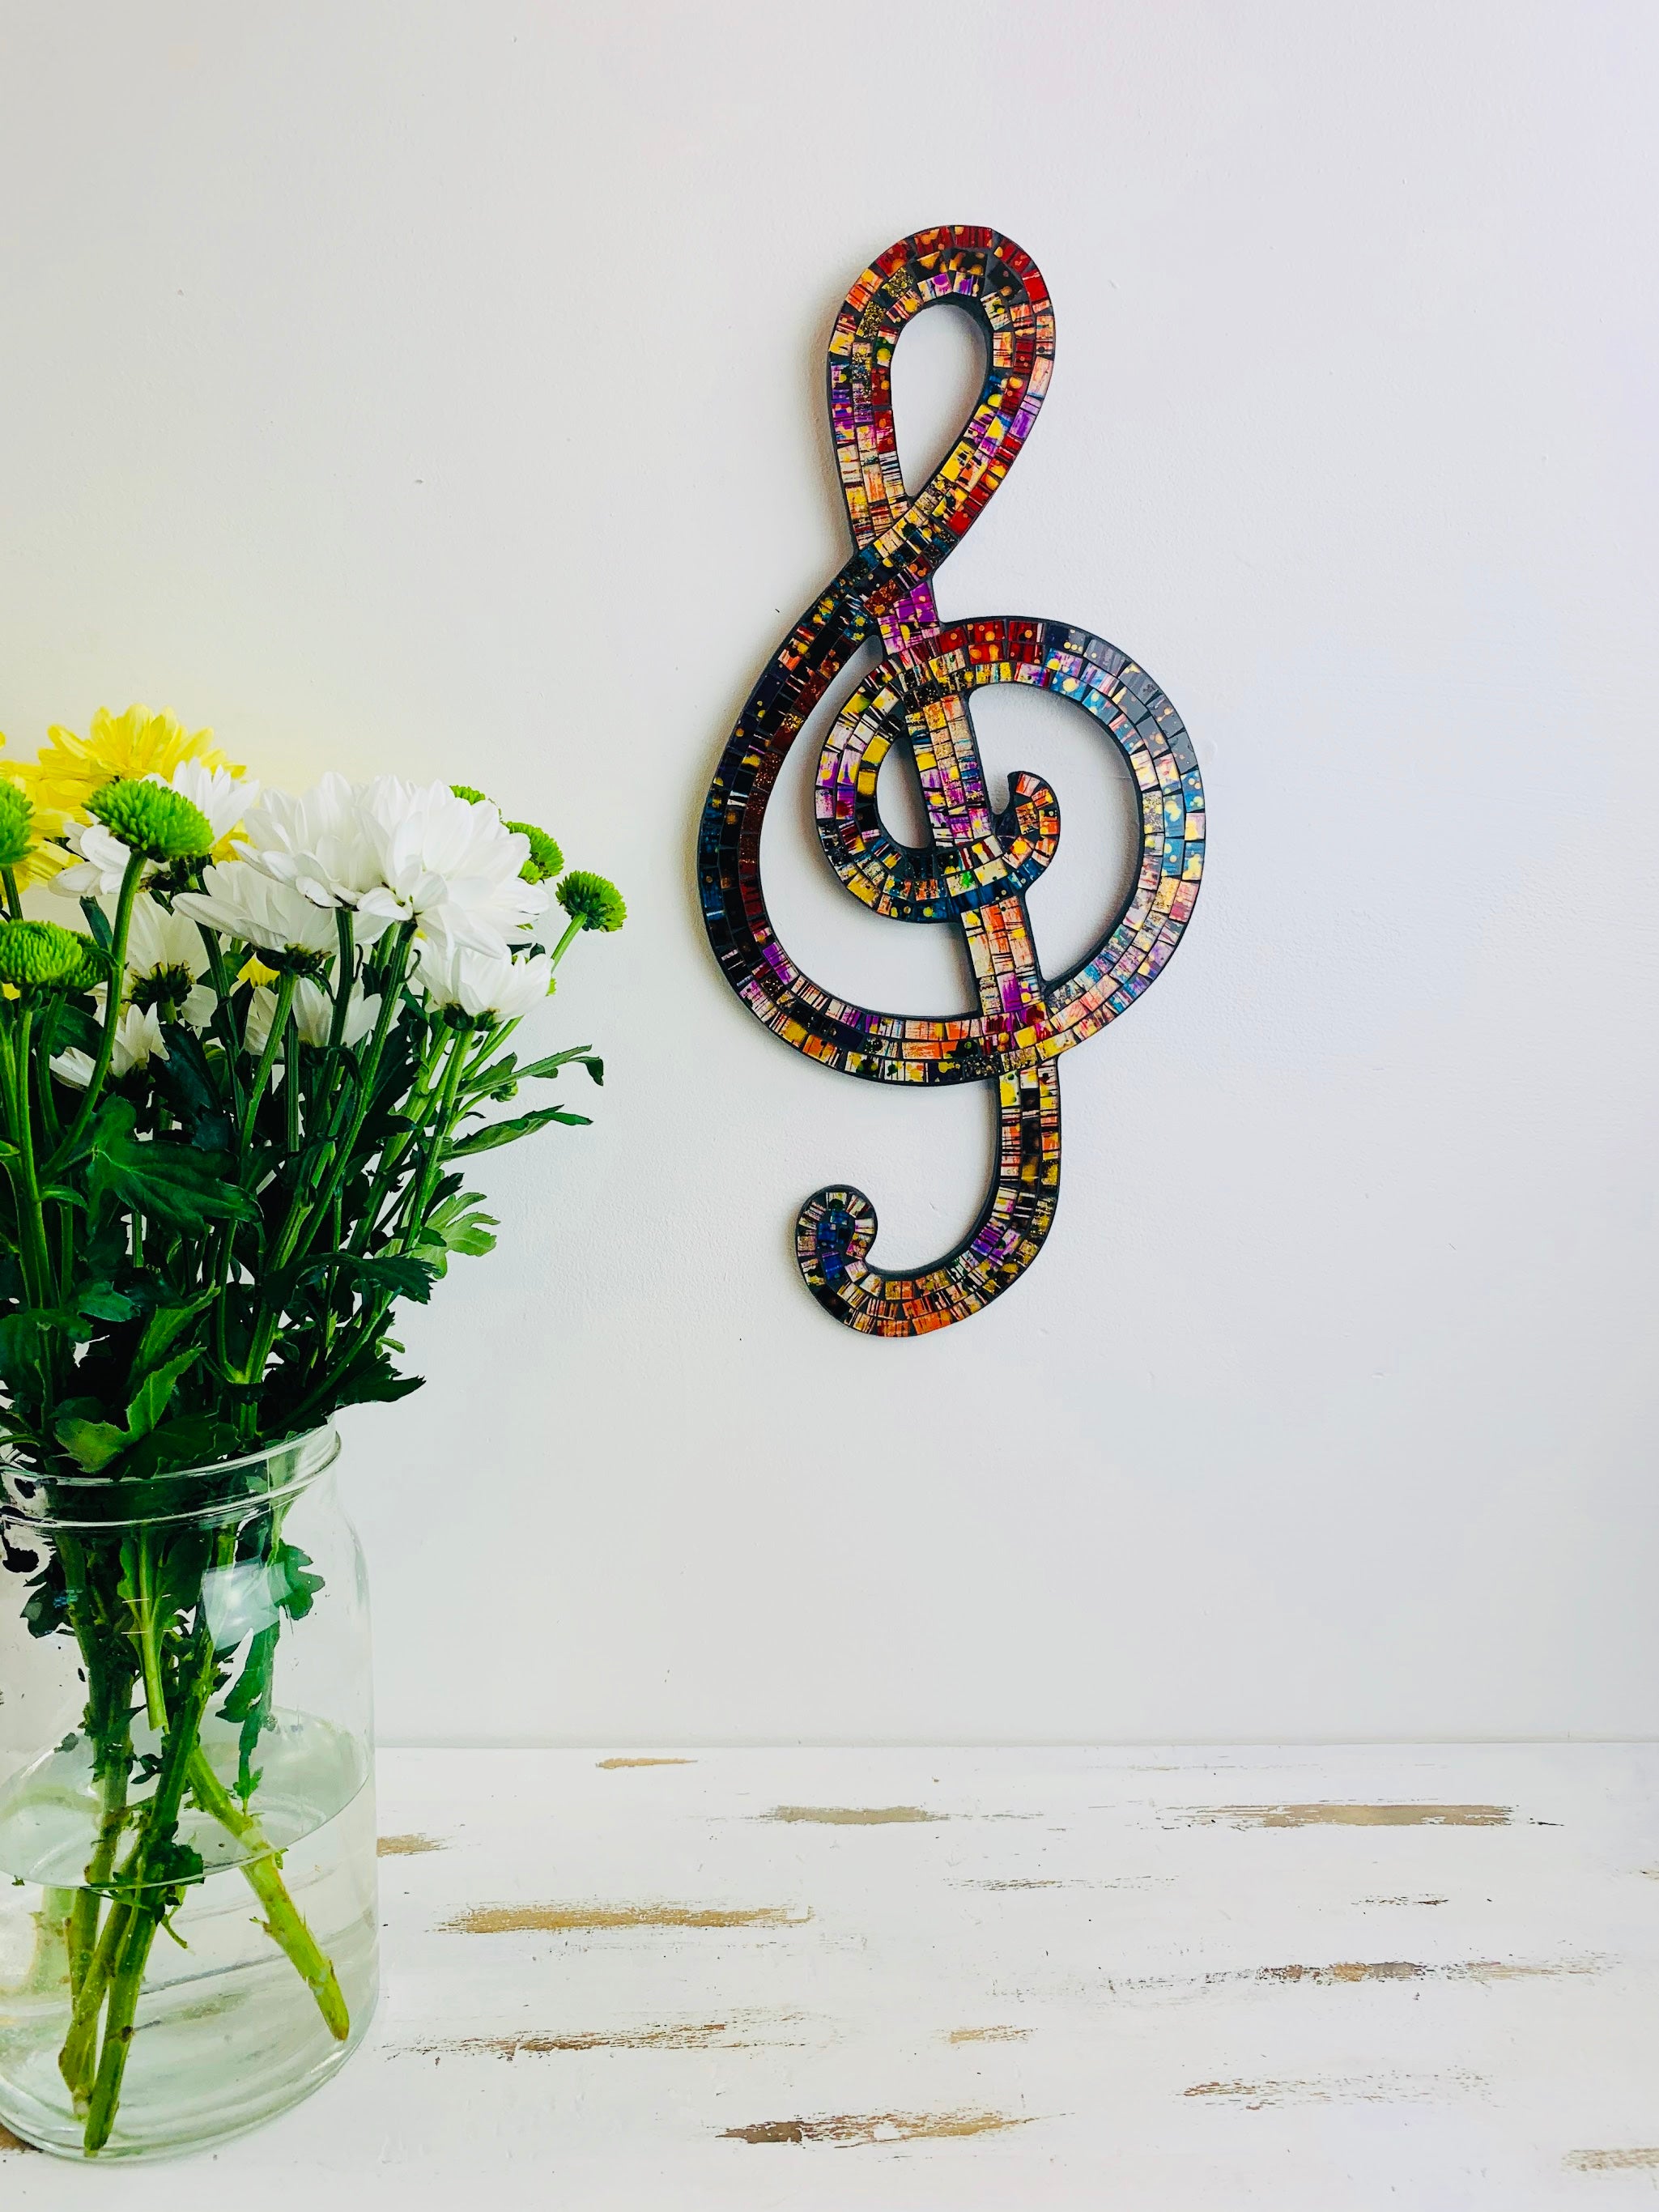 front view of mosaic treble clef hung on wall